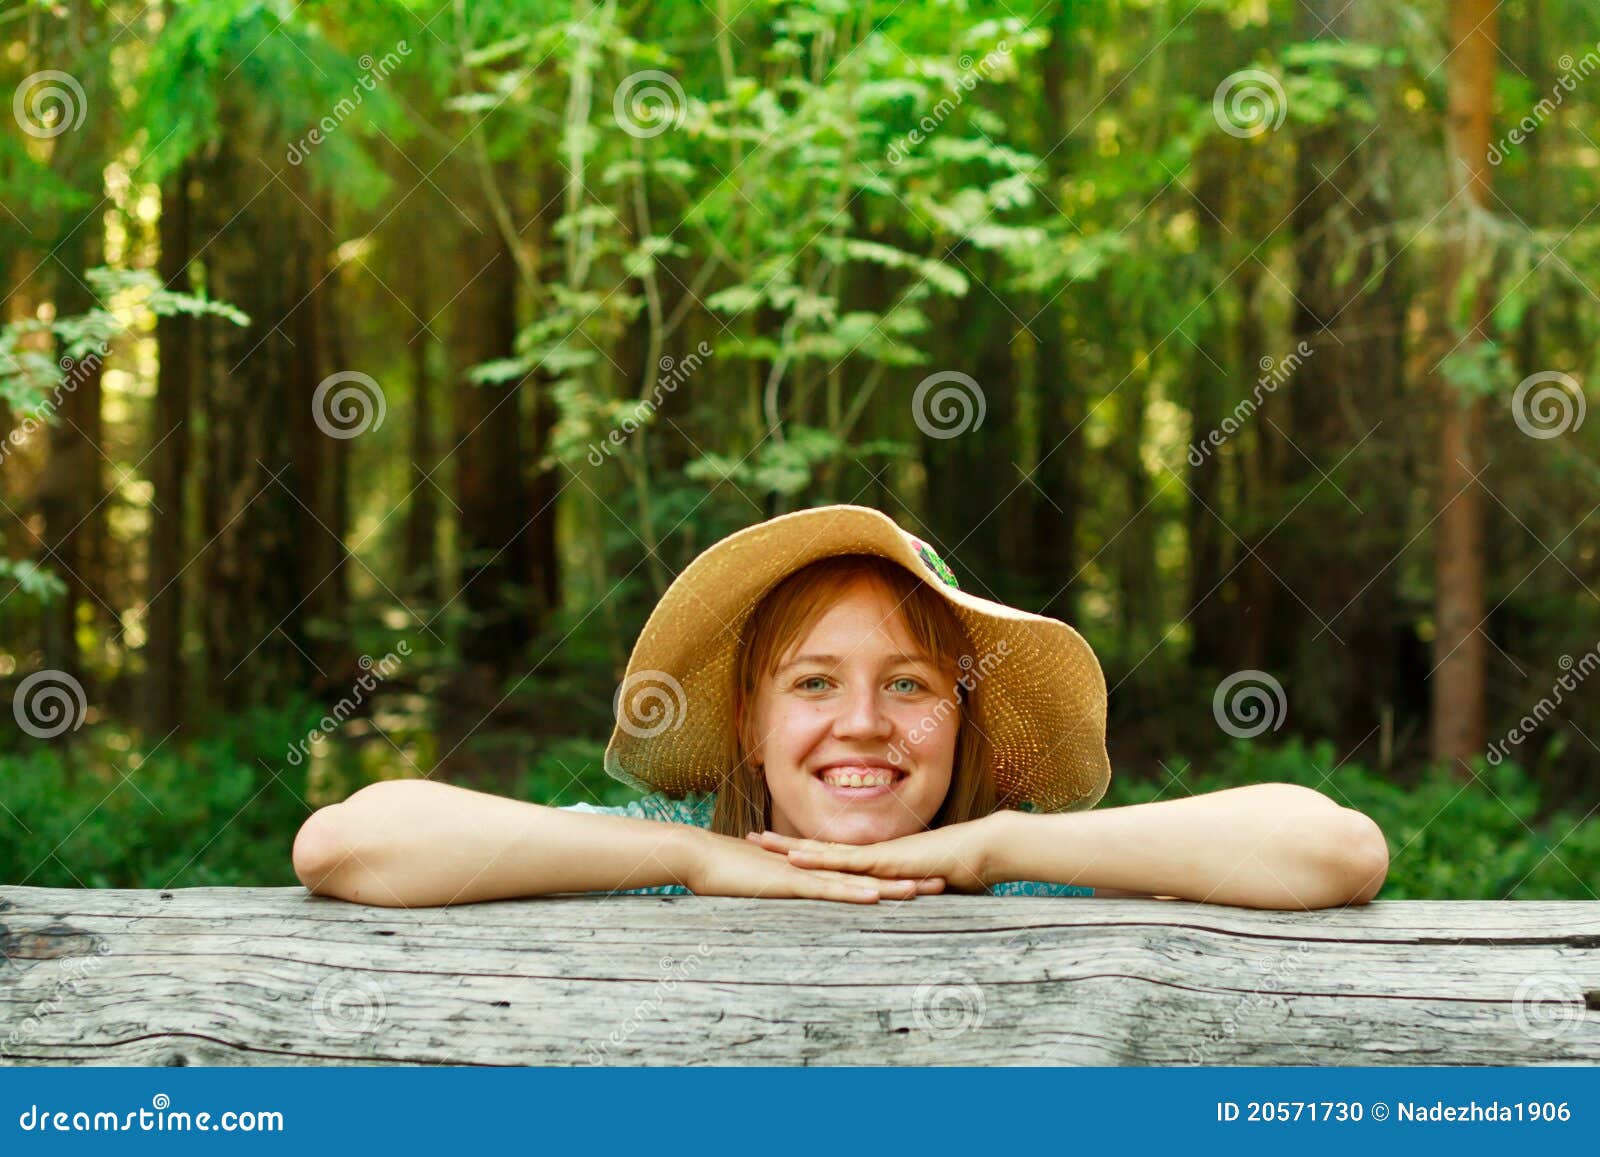 Joy in summer nature stock photo. Image of attractive - 20571730